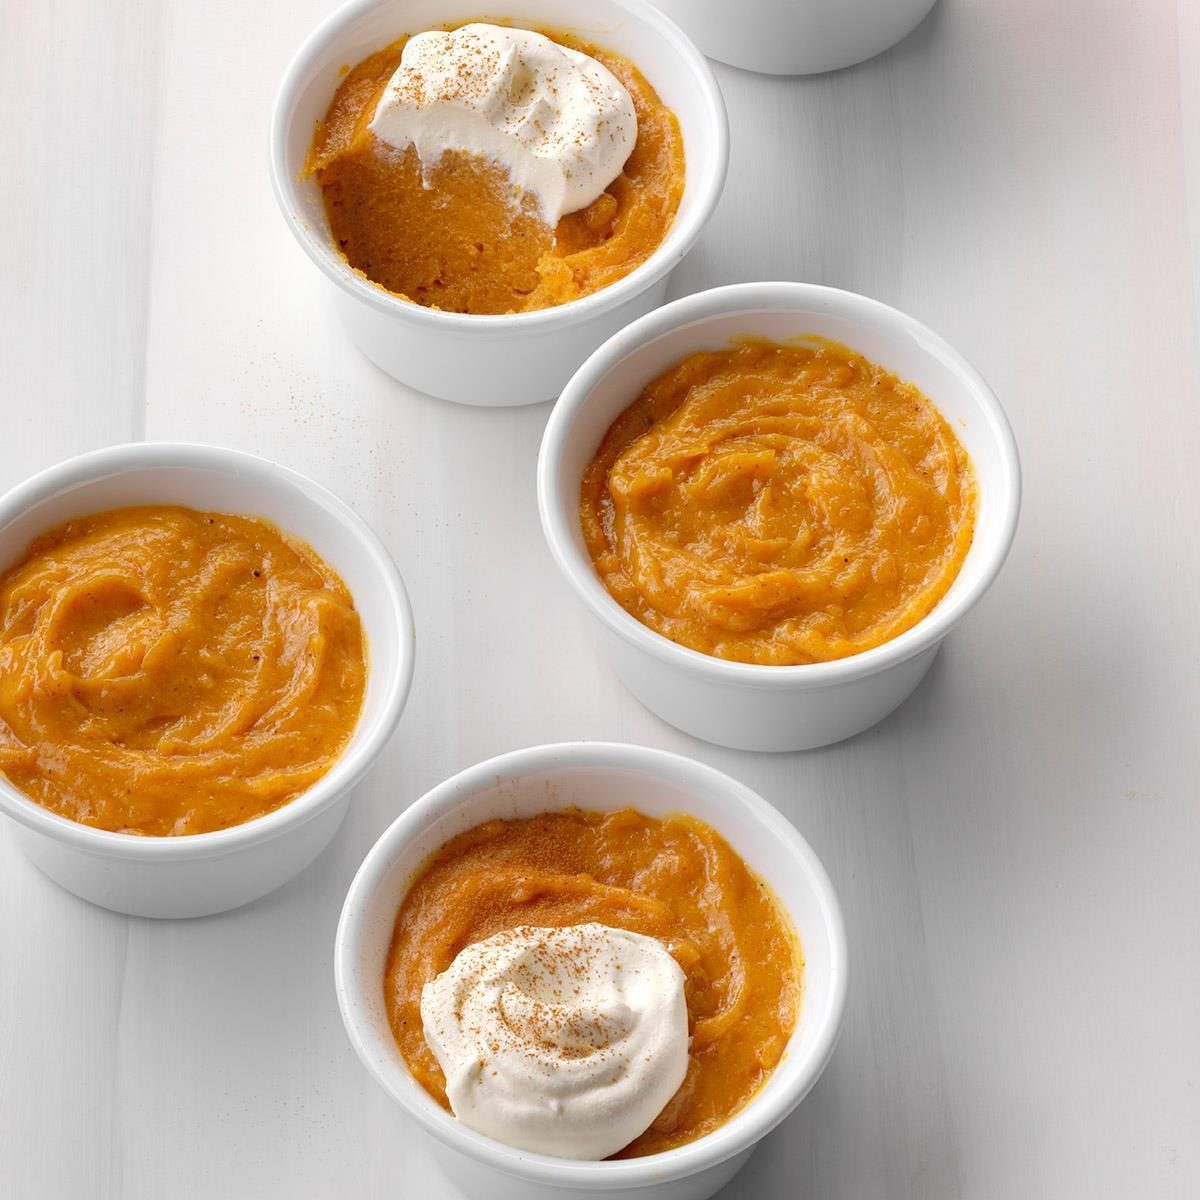 How To Store Leftover Pumpkin Puree